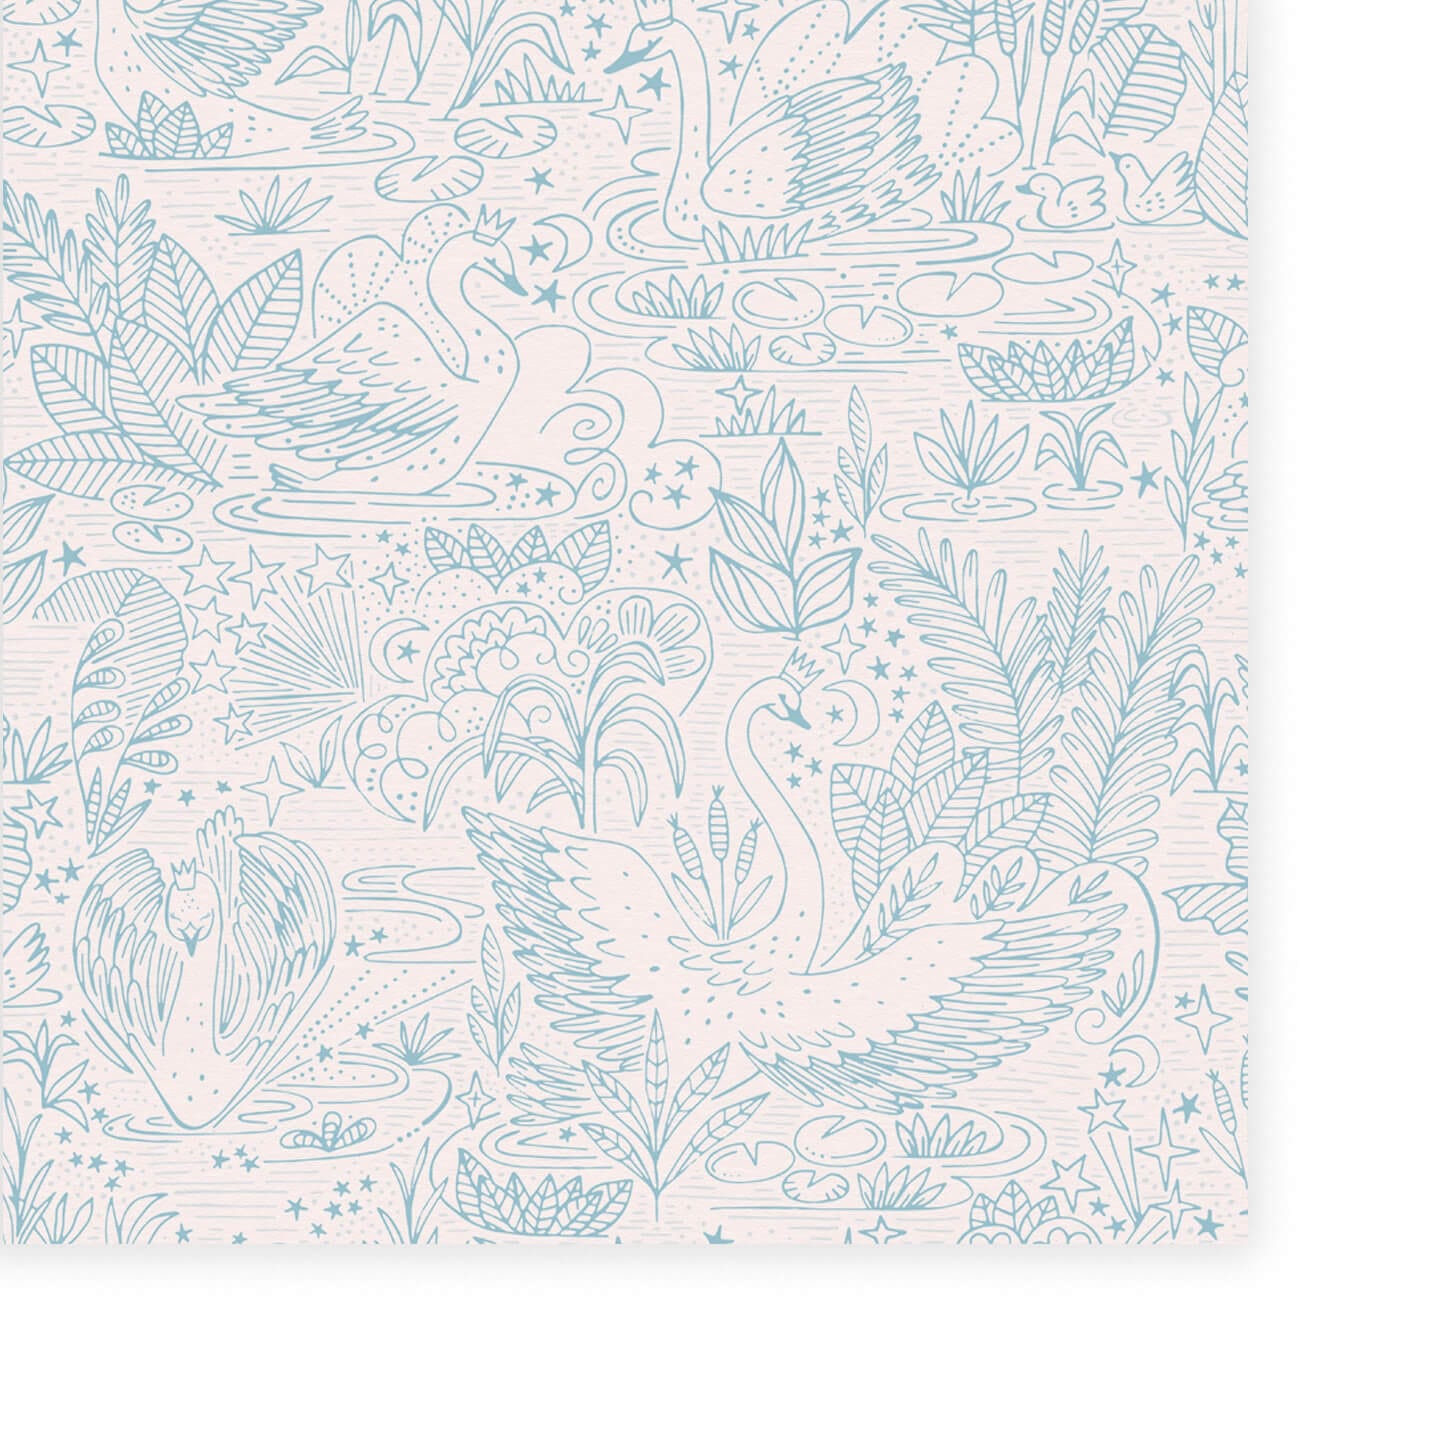 Wallpaper of very detailed floral print with swans gliding across a lake, flowers and leaves surround them. The print is line work and is all in blue